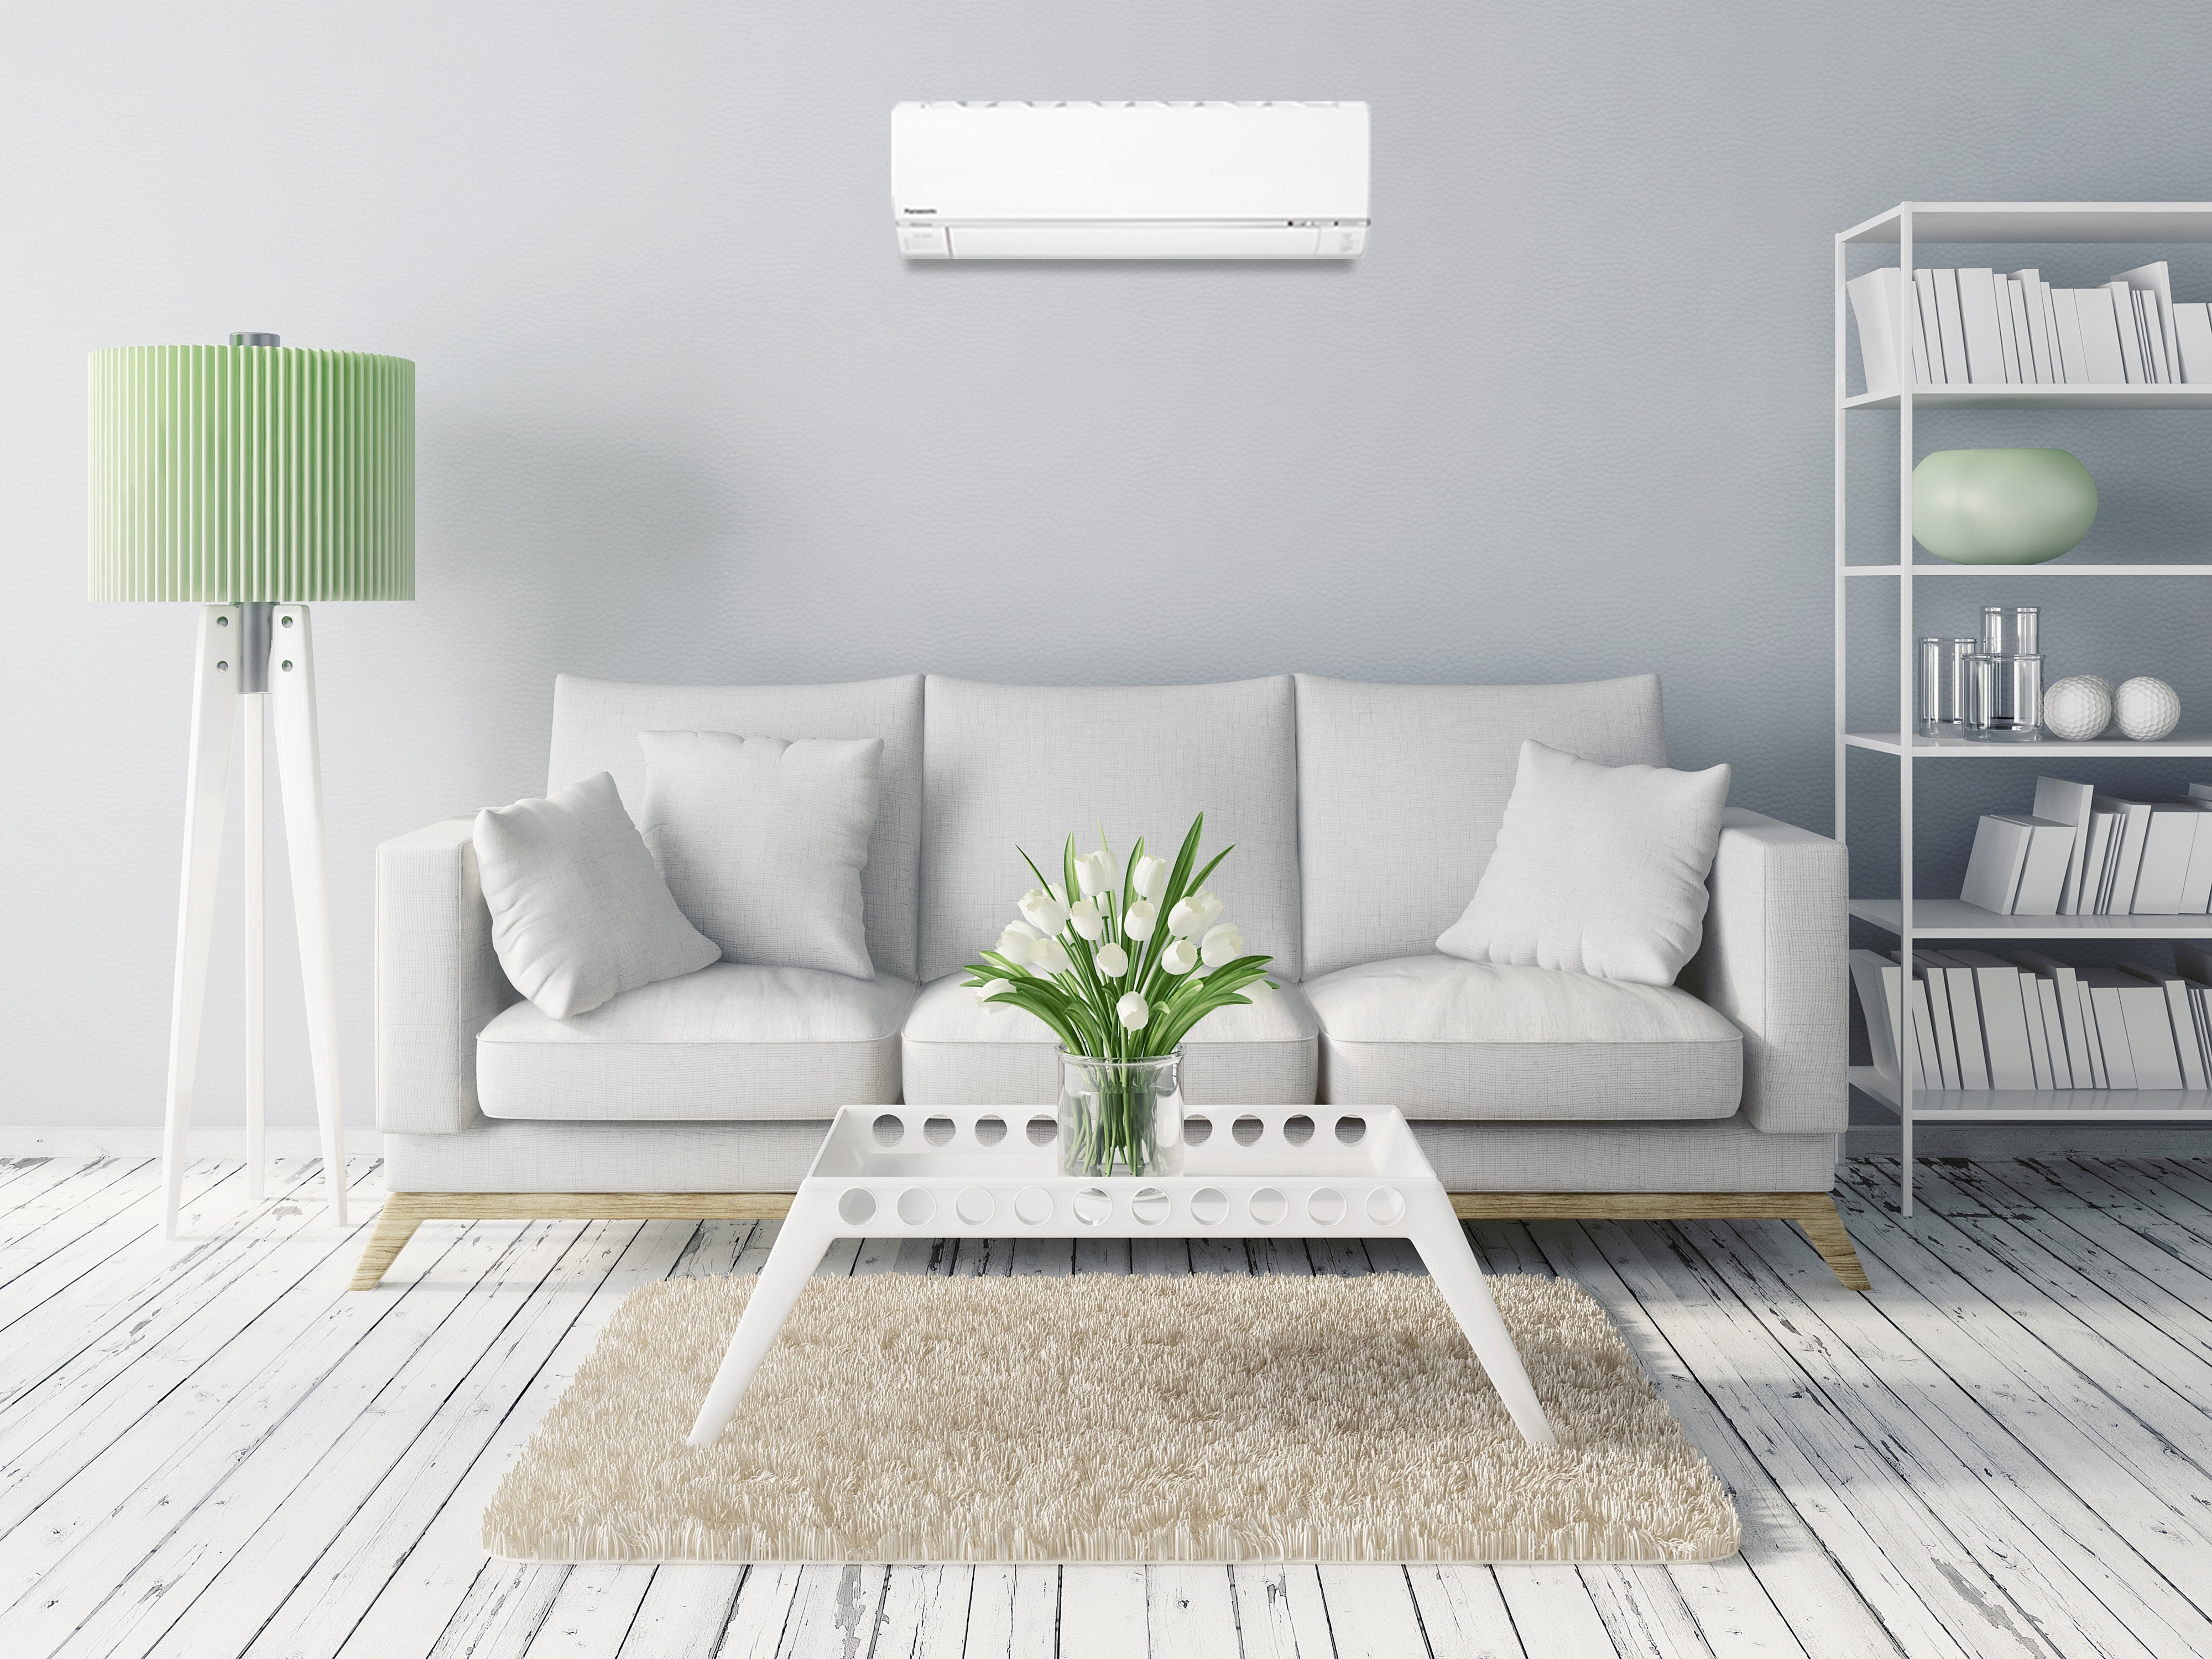 15 Best Wall Mount AC for 2023